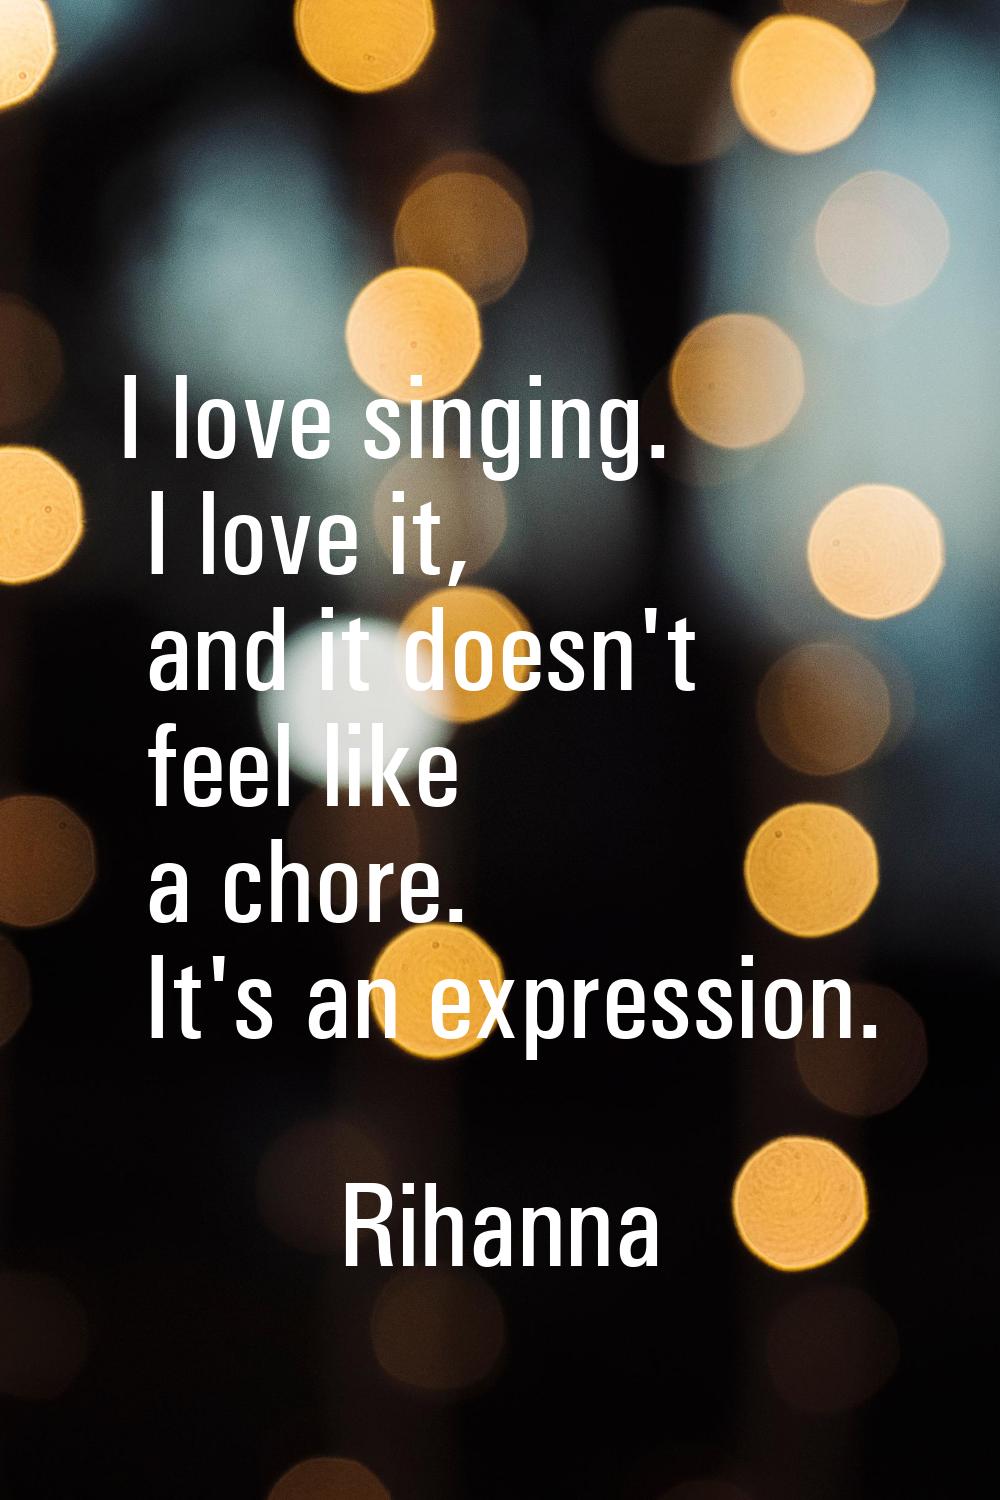 I love singing. I love it, and it doesn't feel like a chore. It's an expression.